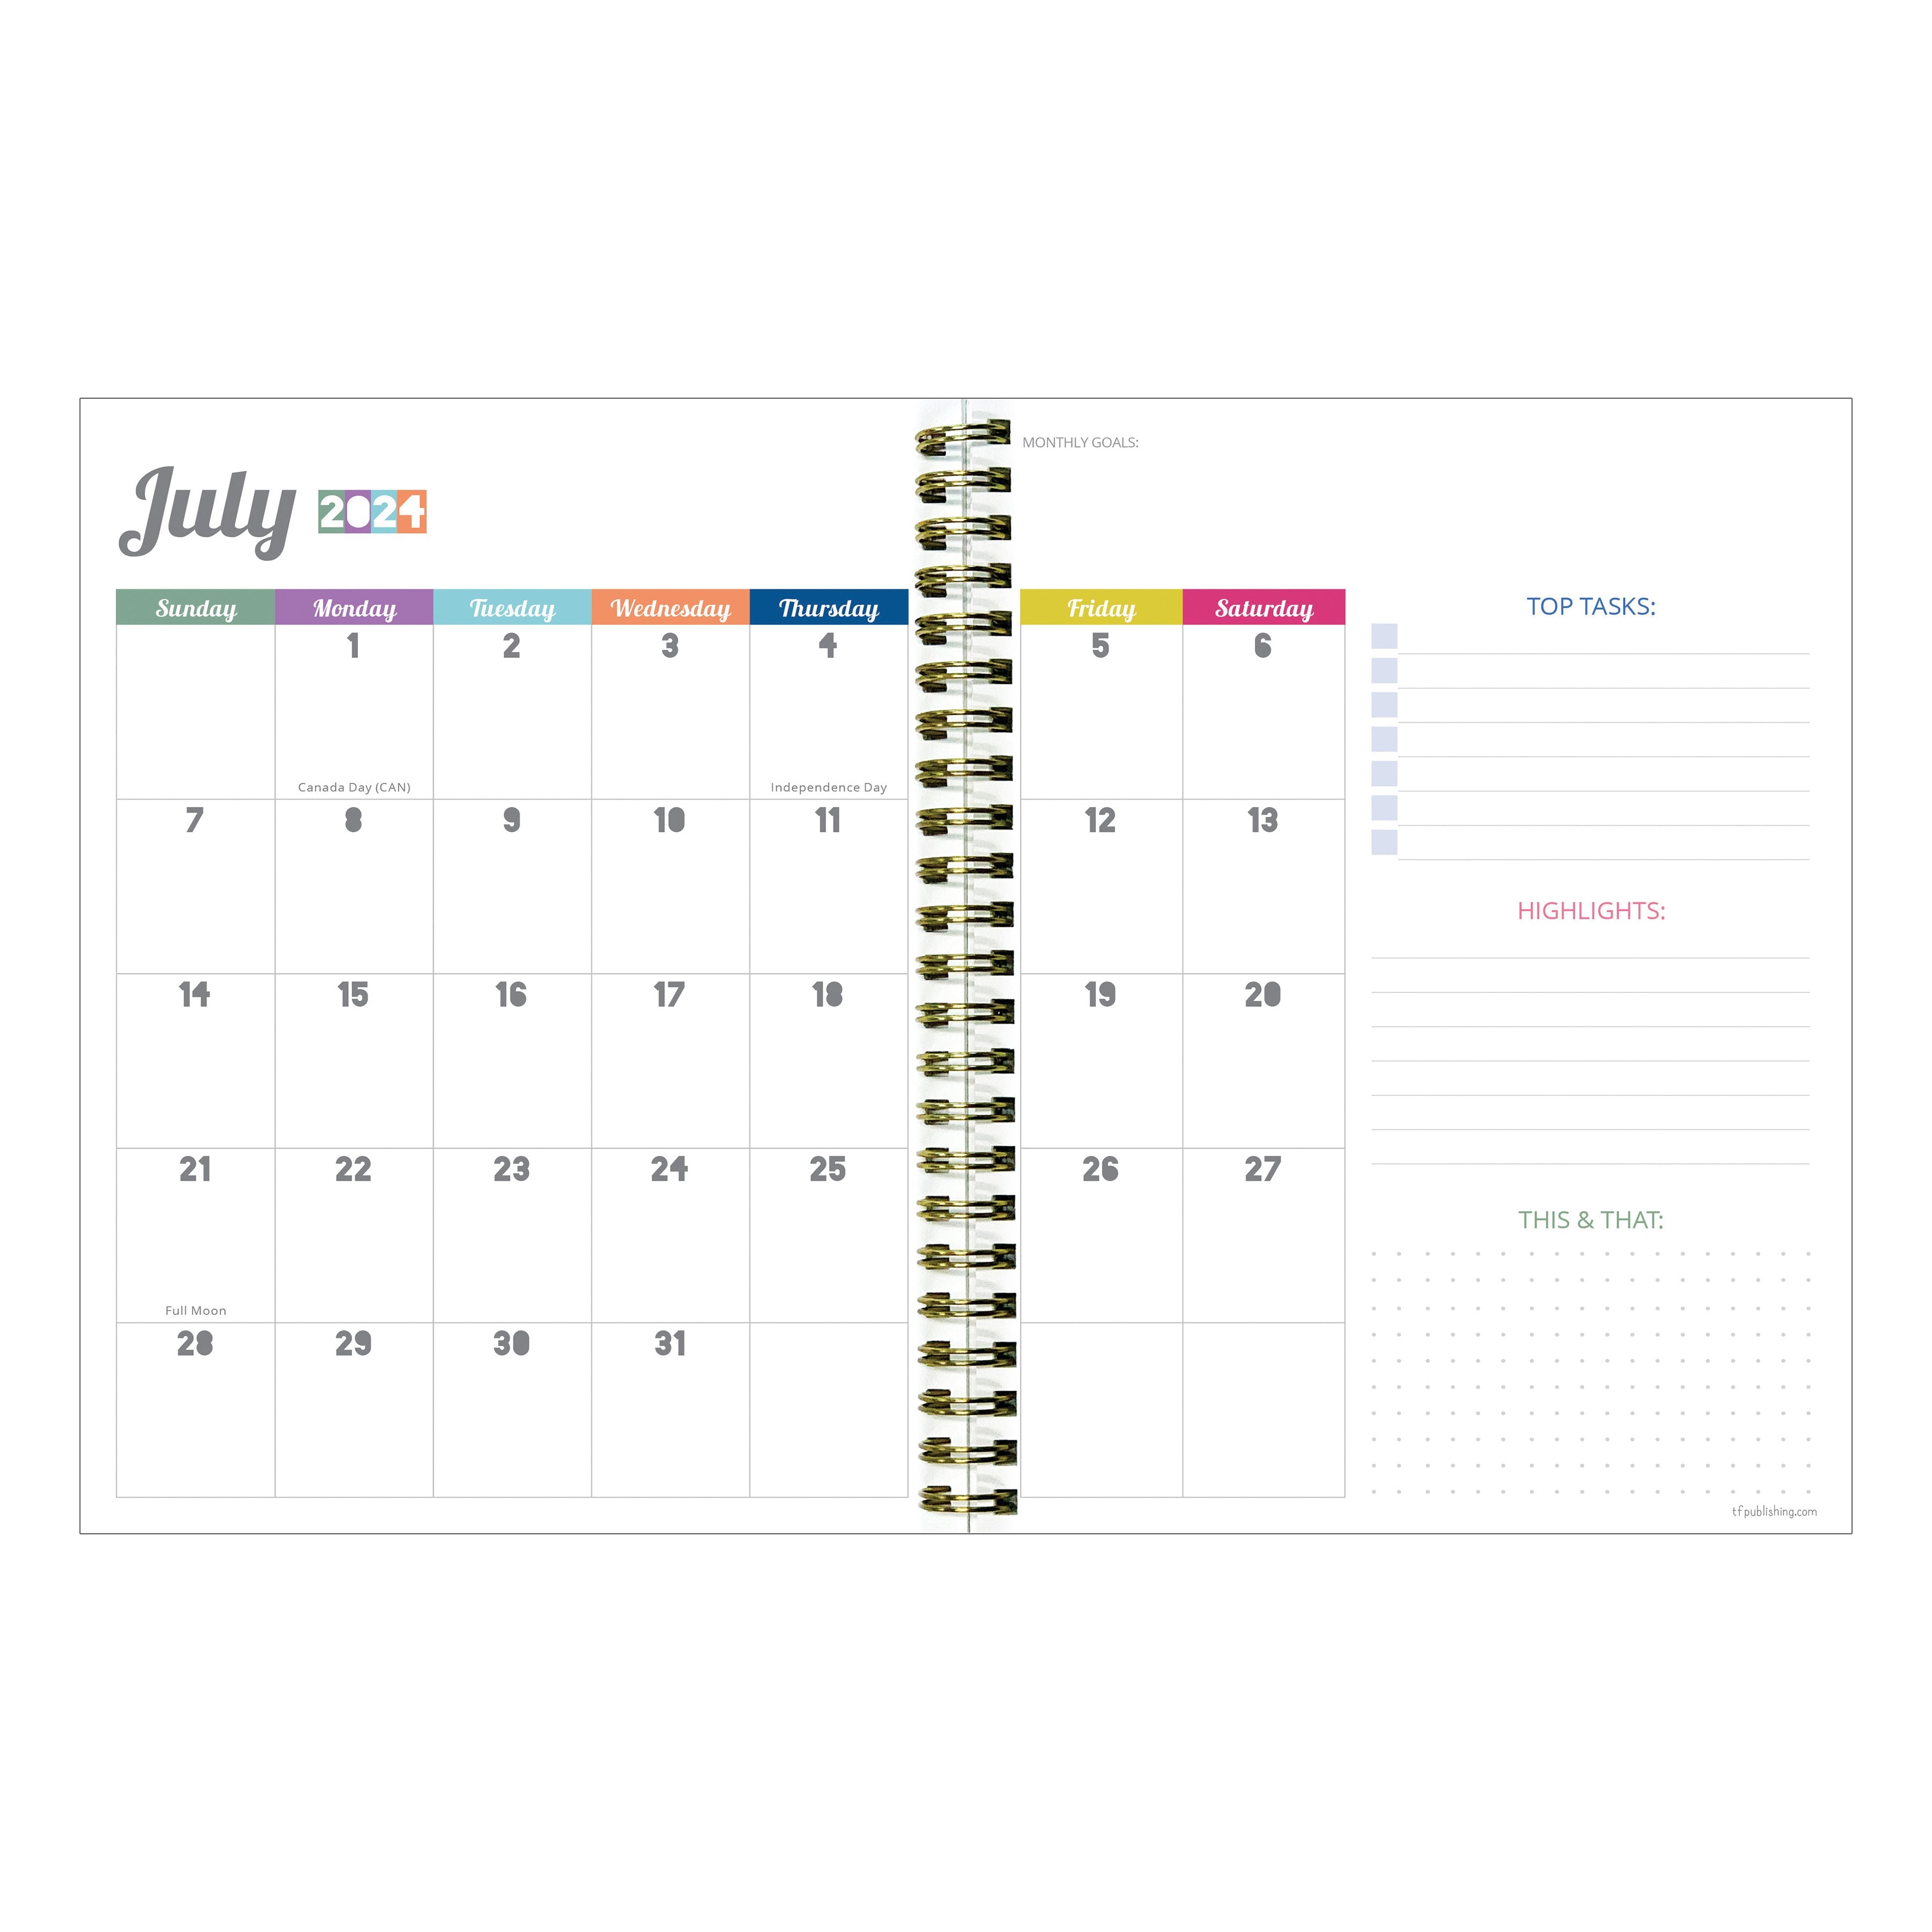 July 2024 - June 2025 Gumballs - Medium Weekly & Monthly Academic Year Diary/Planner